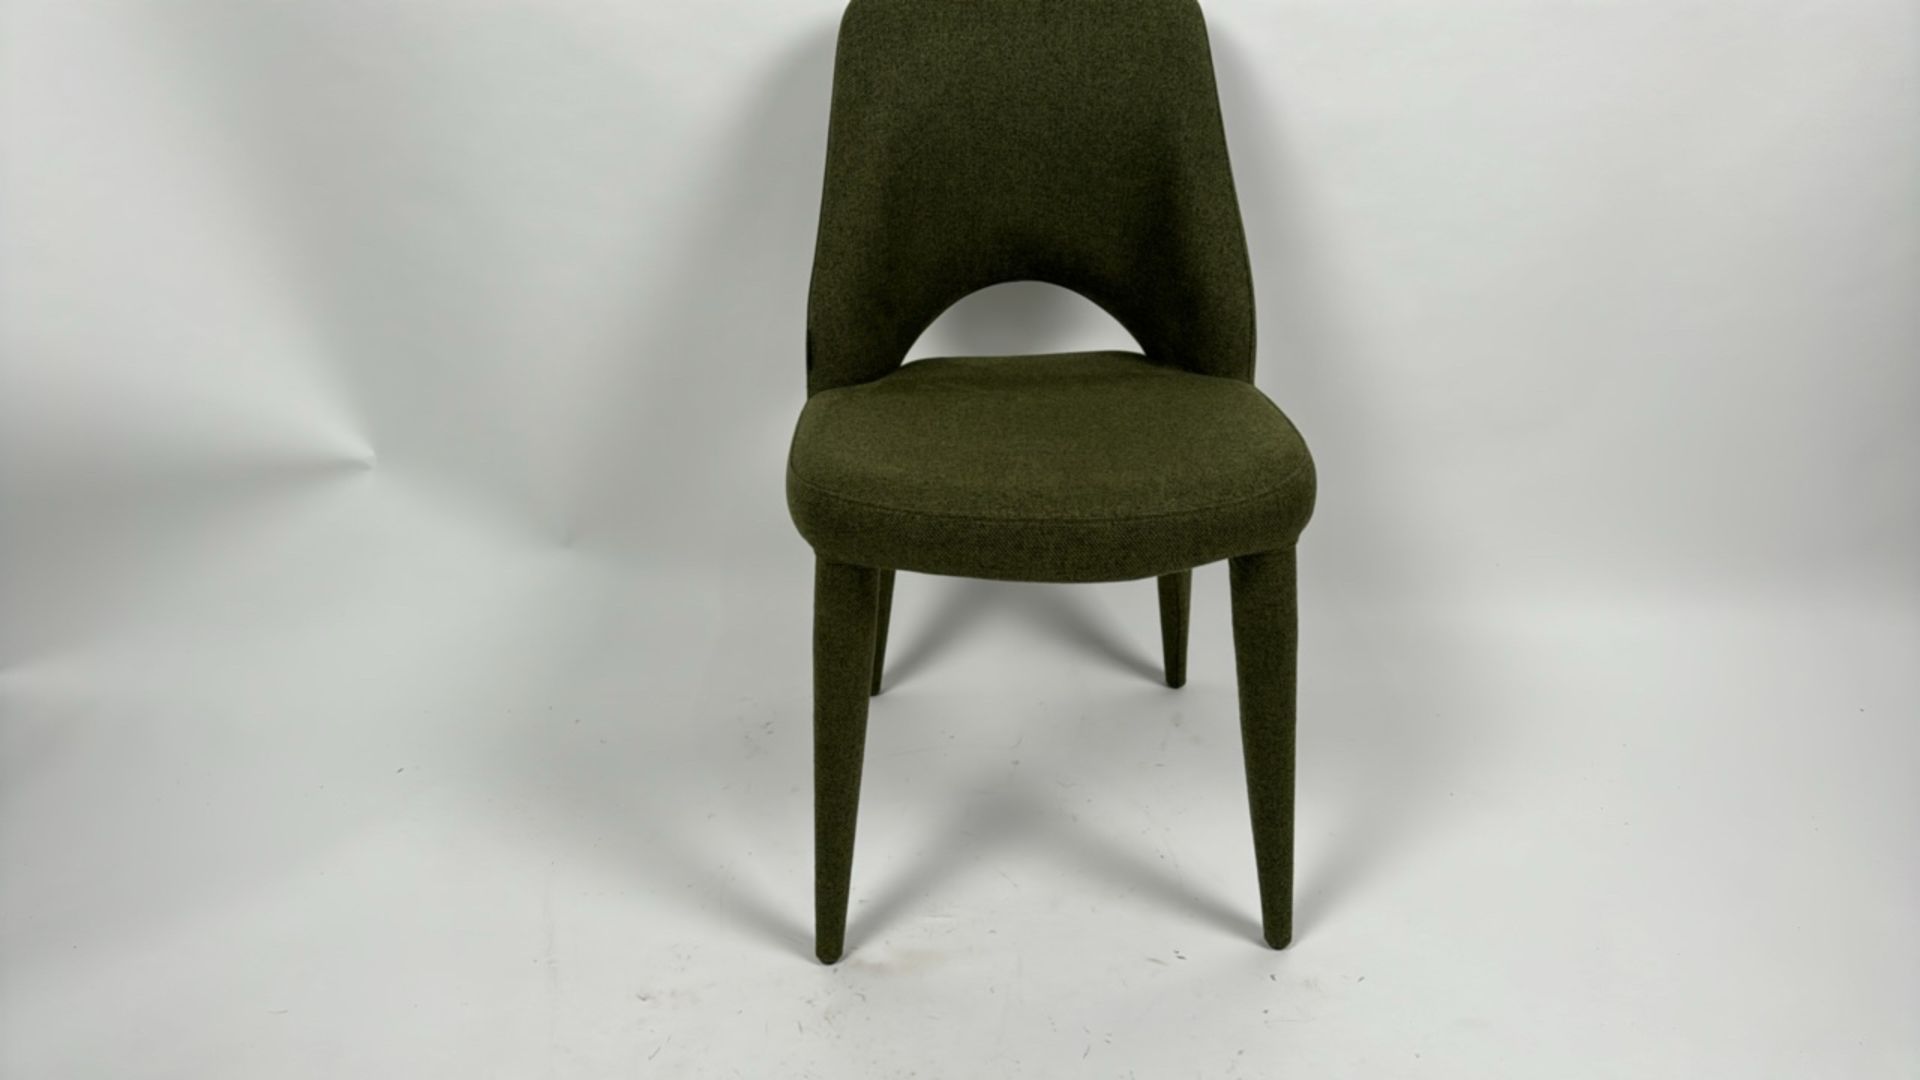 Pols Potten Holy Padded Chair Forest Green - Image 2 of 5